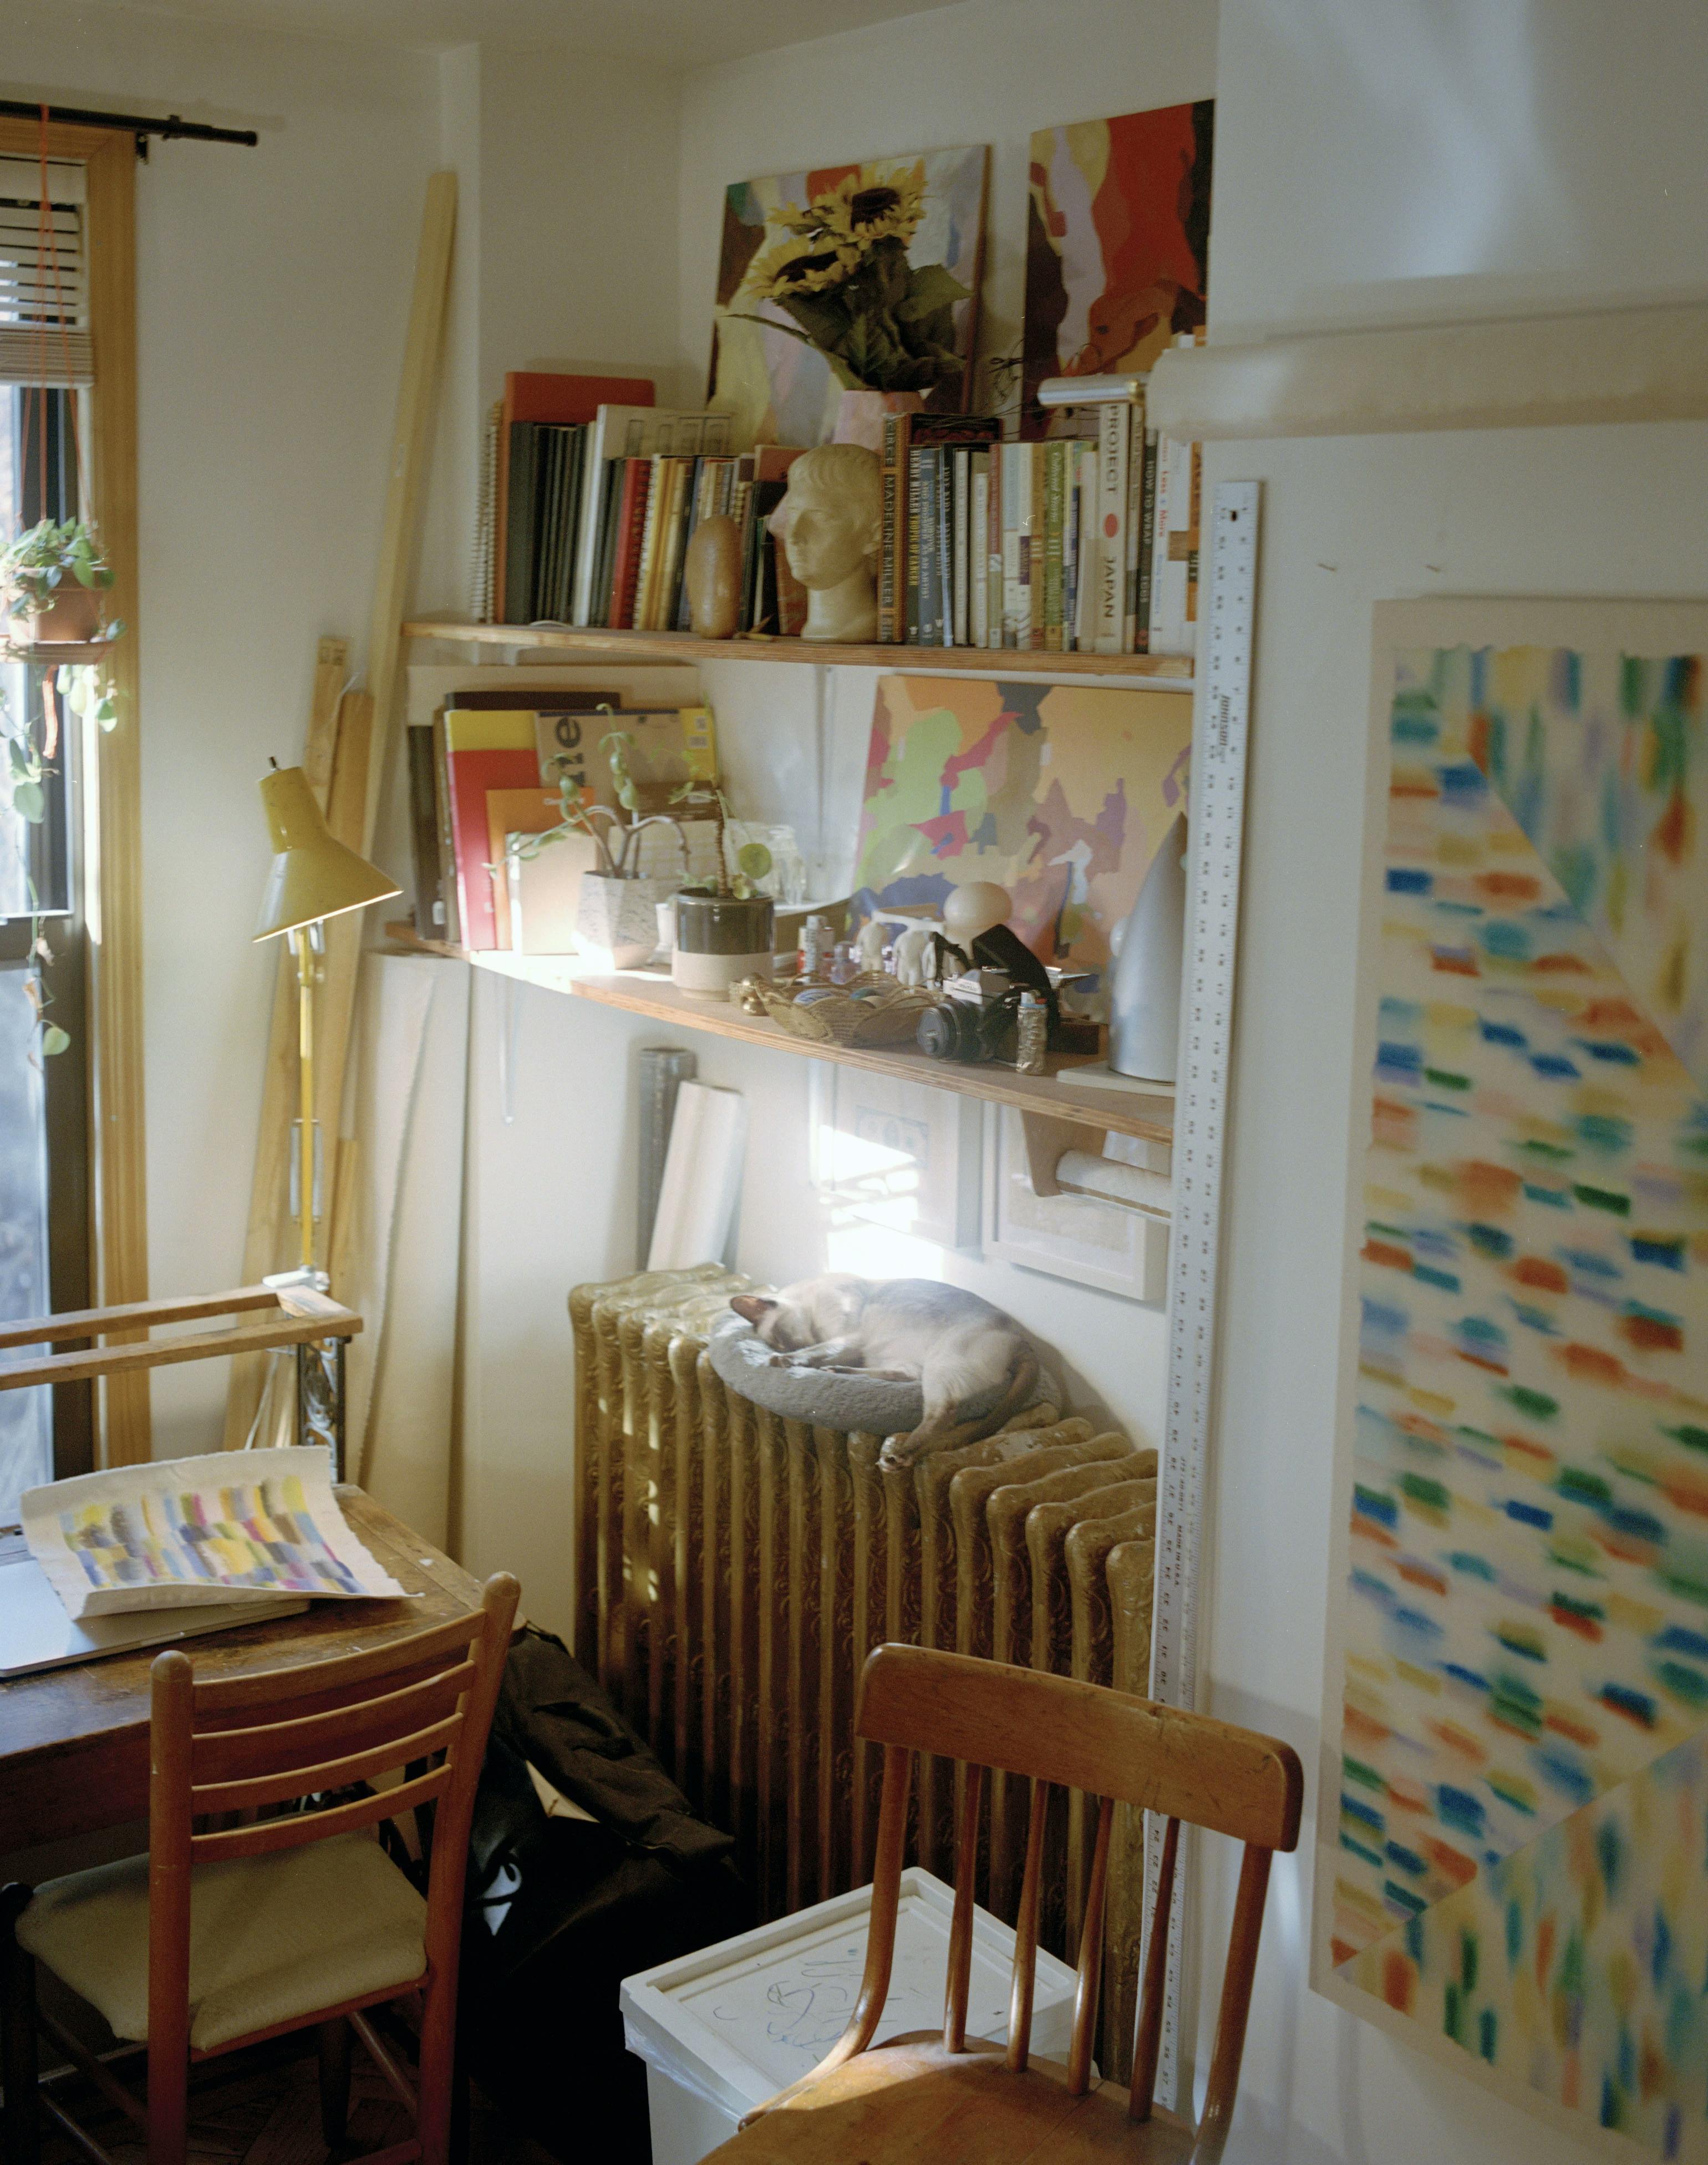 Artist Devon Reina's studio filled with bookshelves and colorful books.